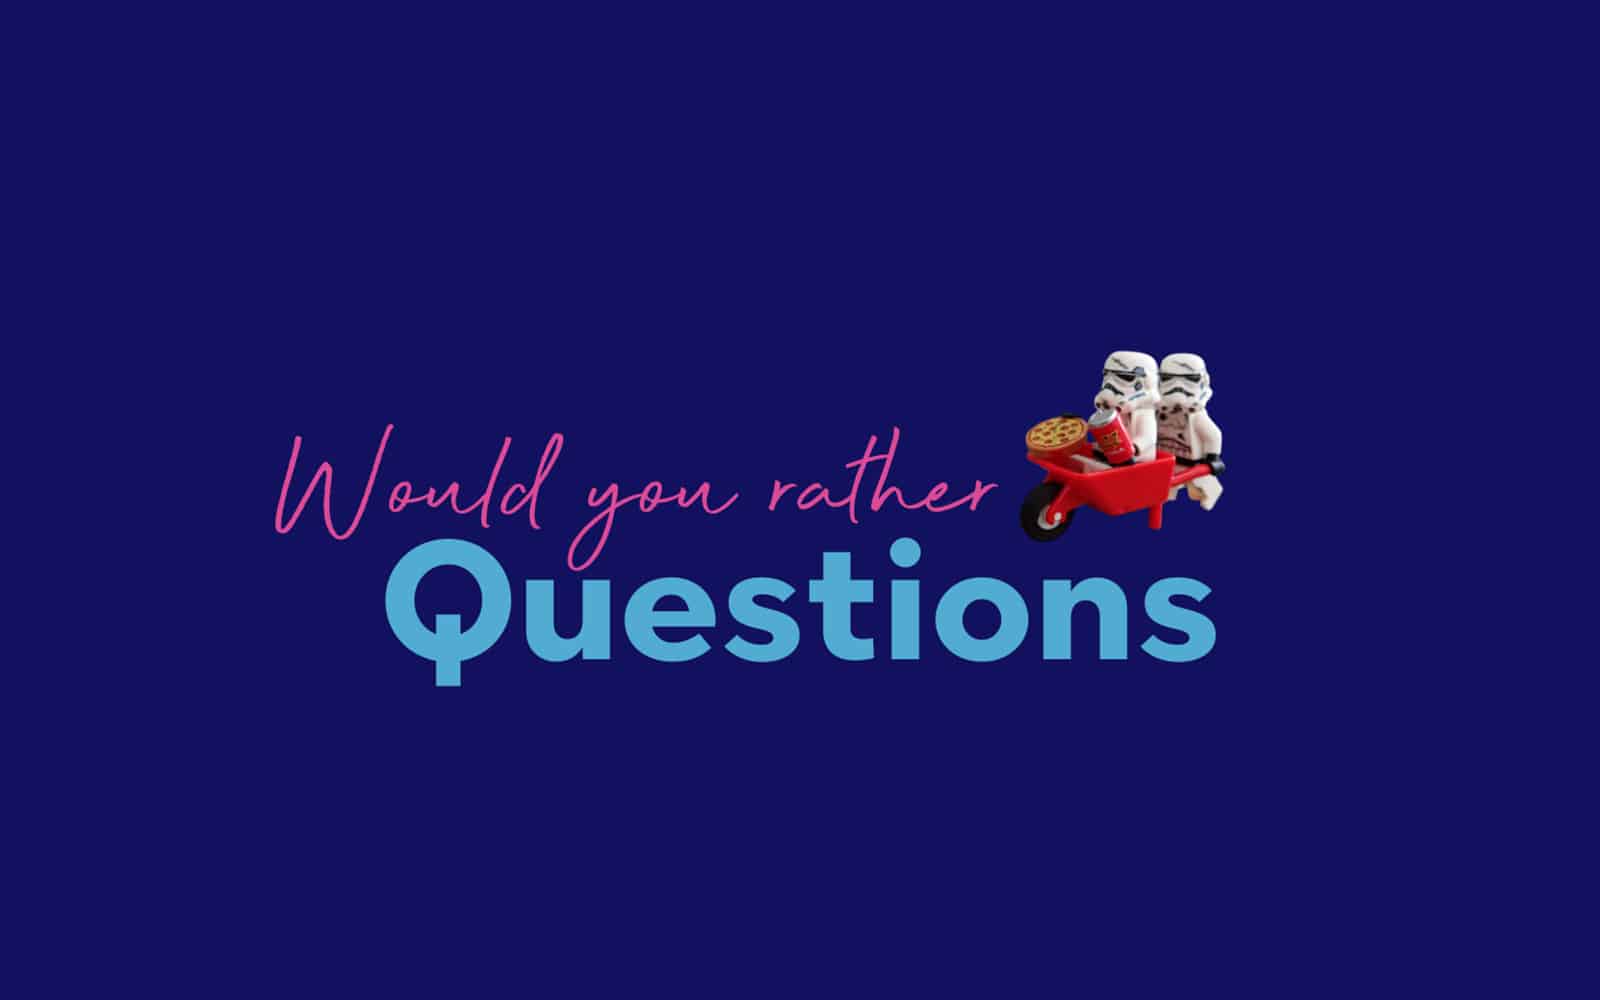 deepthoughts #hardquestions #questions #wyr #wouldyourather